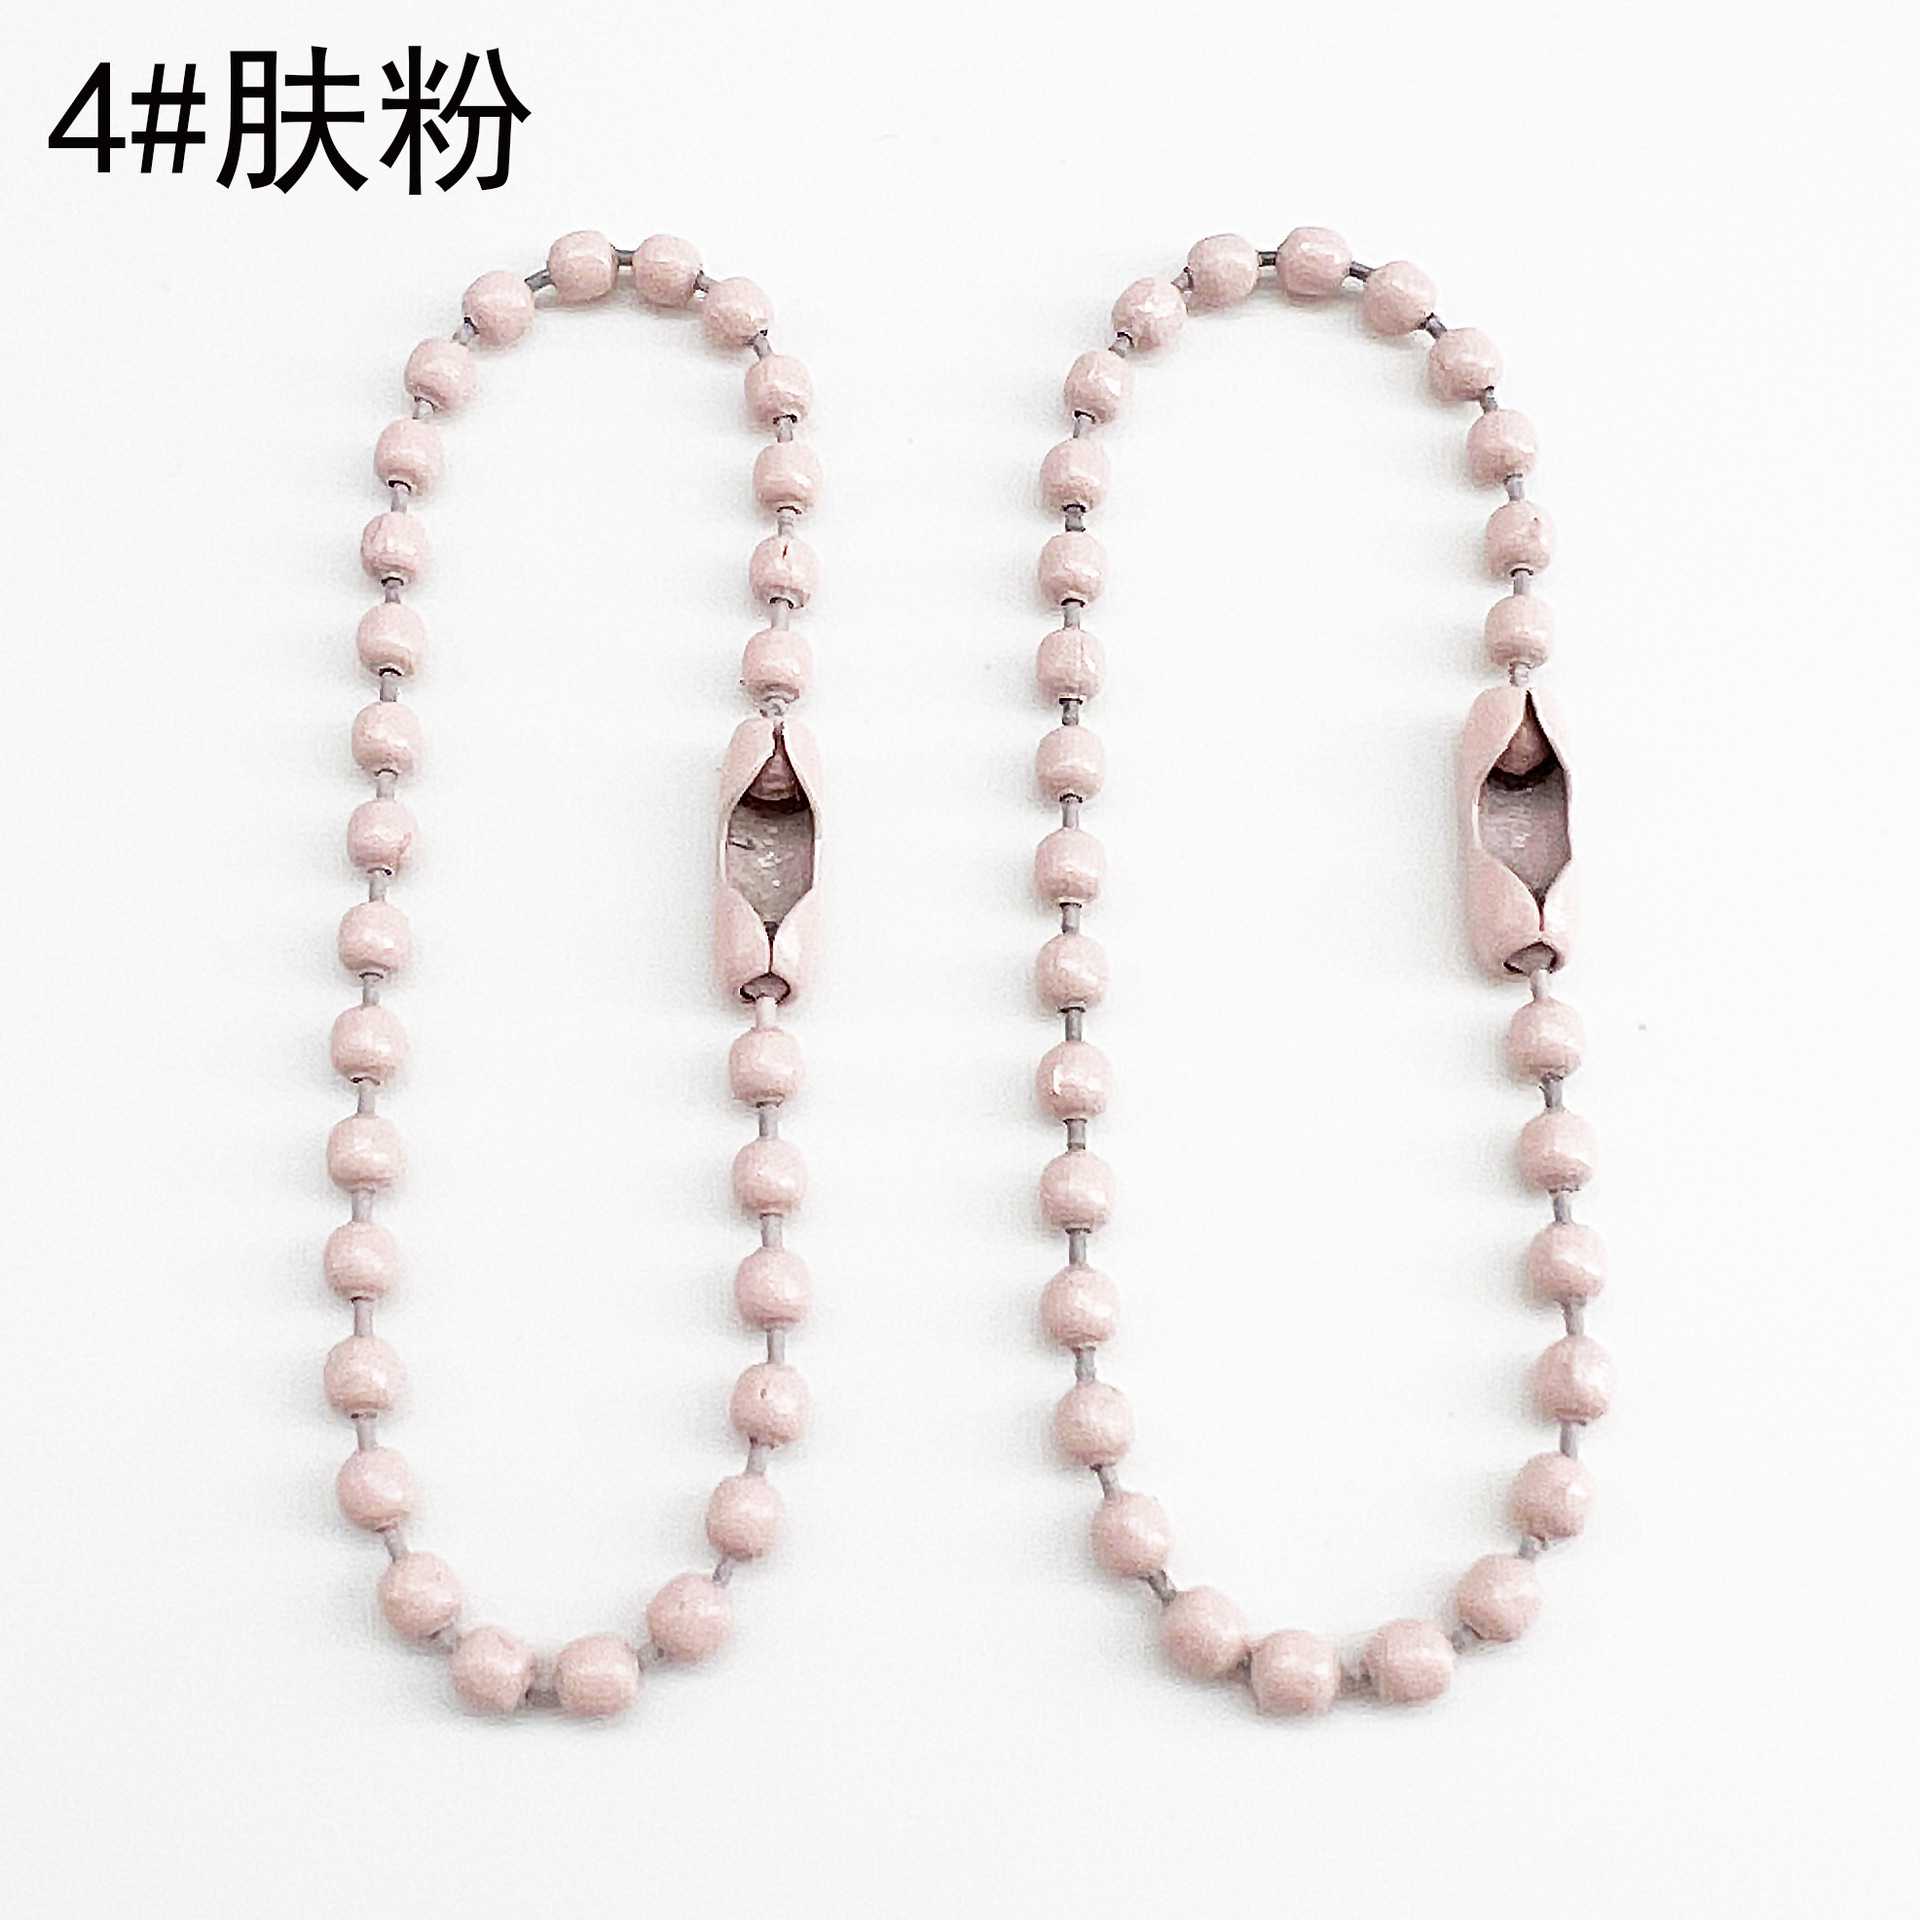 Manufacturer Candy Color Bead Necklace Metal Chain Ball Bead Chain Paint Ball Chain Key Chain Diy Ornament Accessories